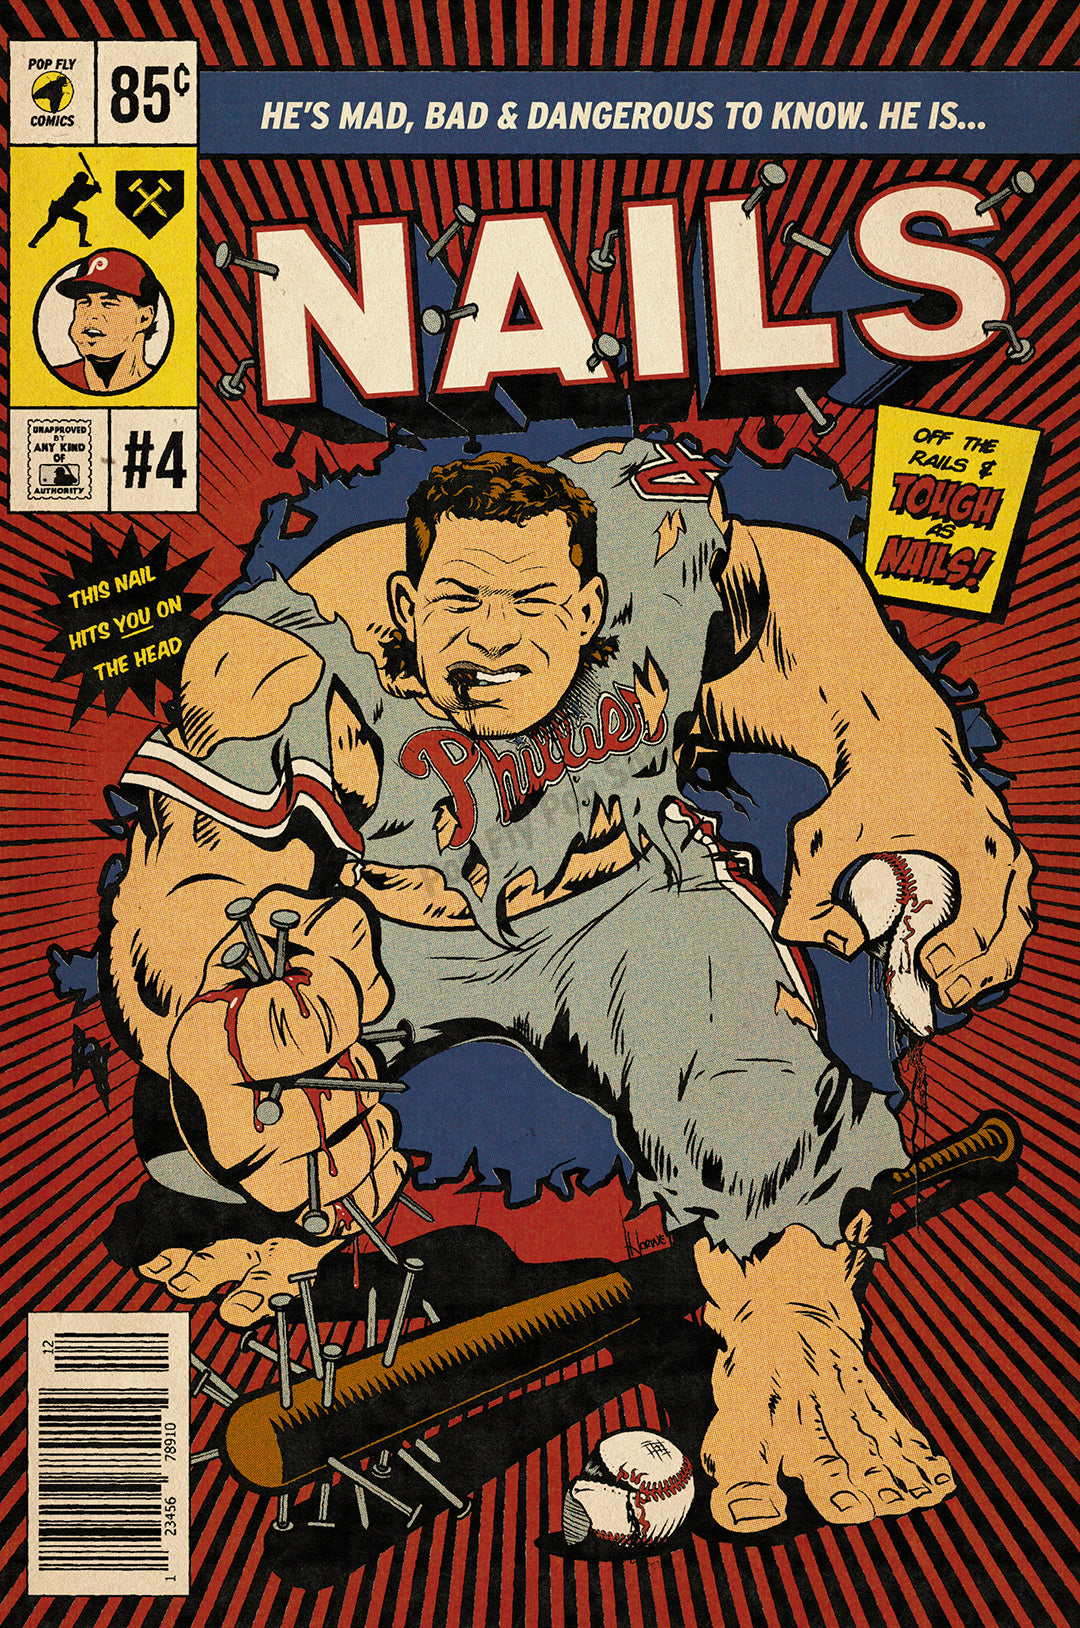 03. (SOLD OUT) "Nails" Lenny Dykstra 7" x 10.5" Art Print